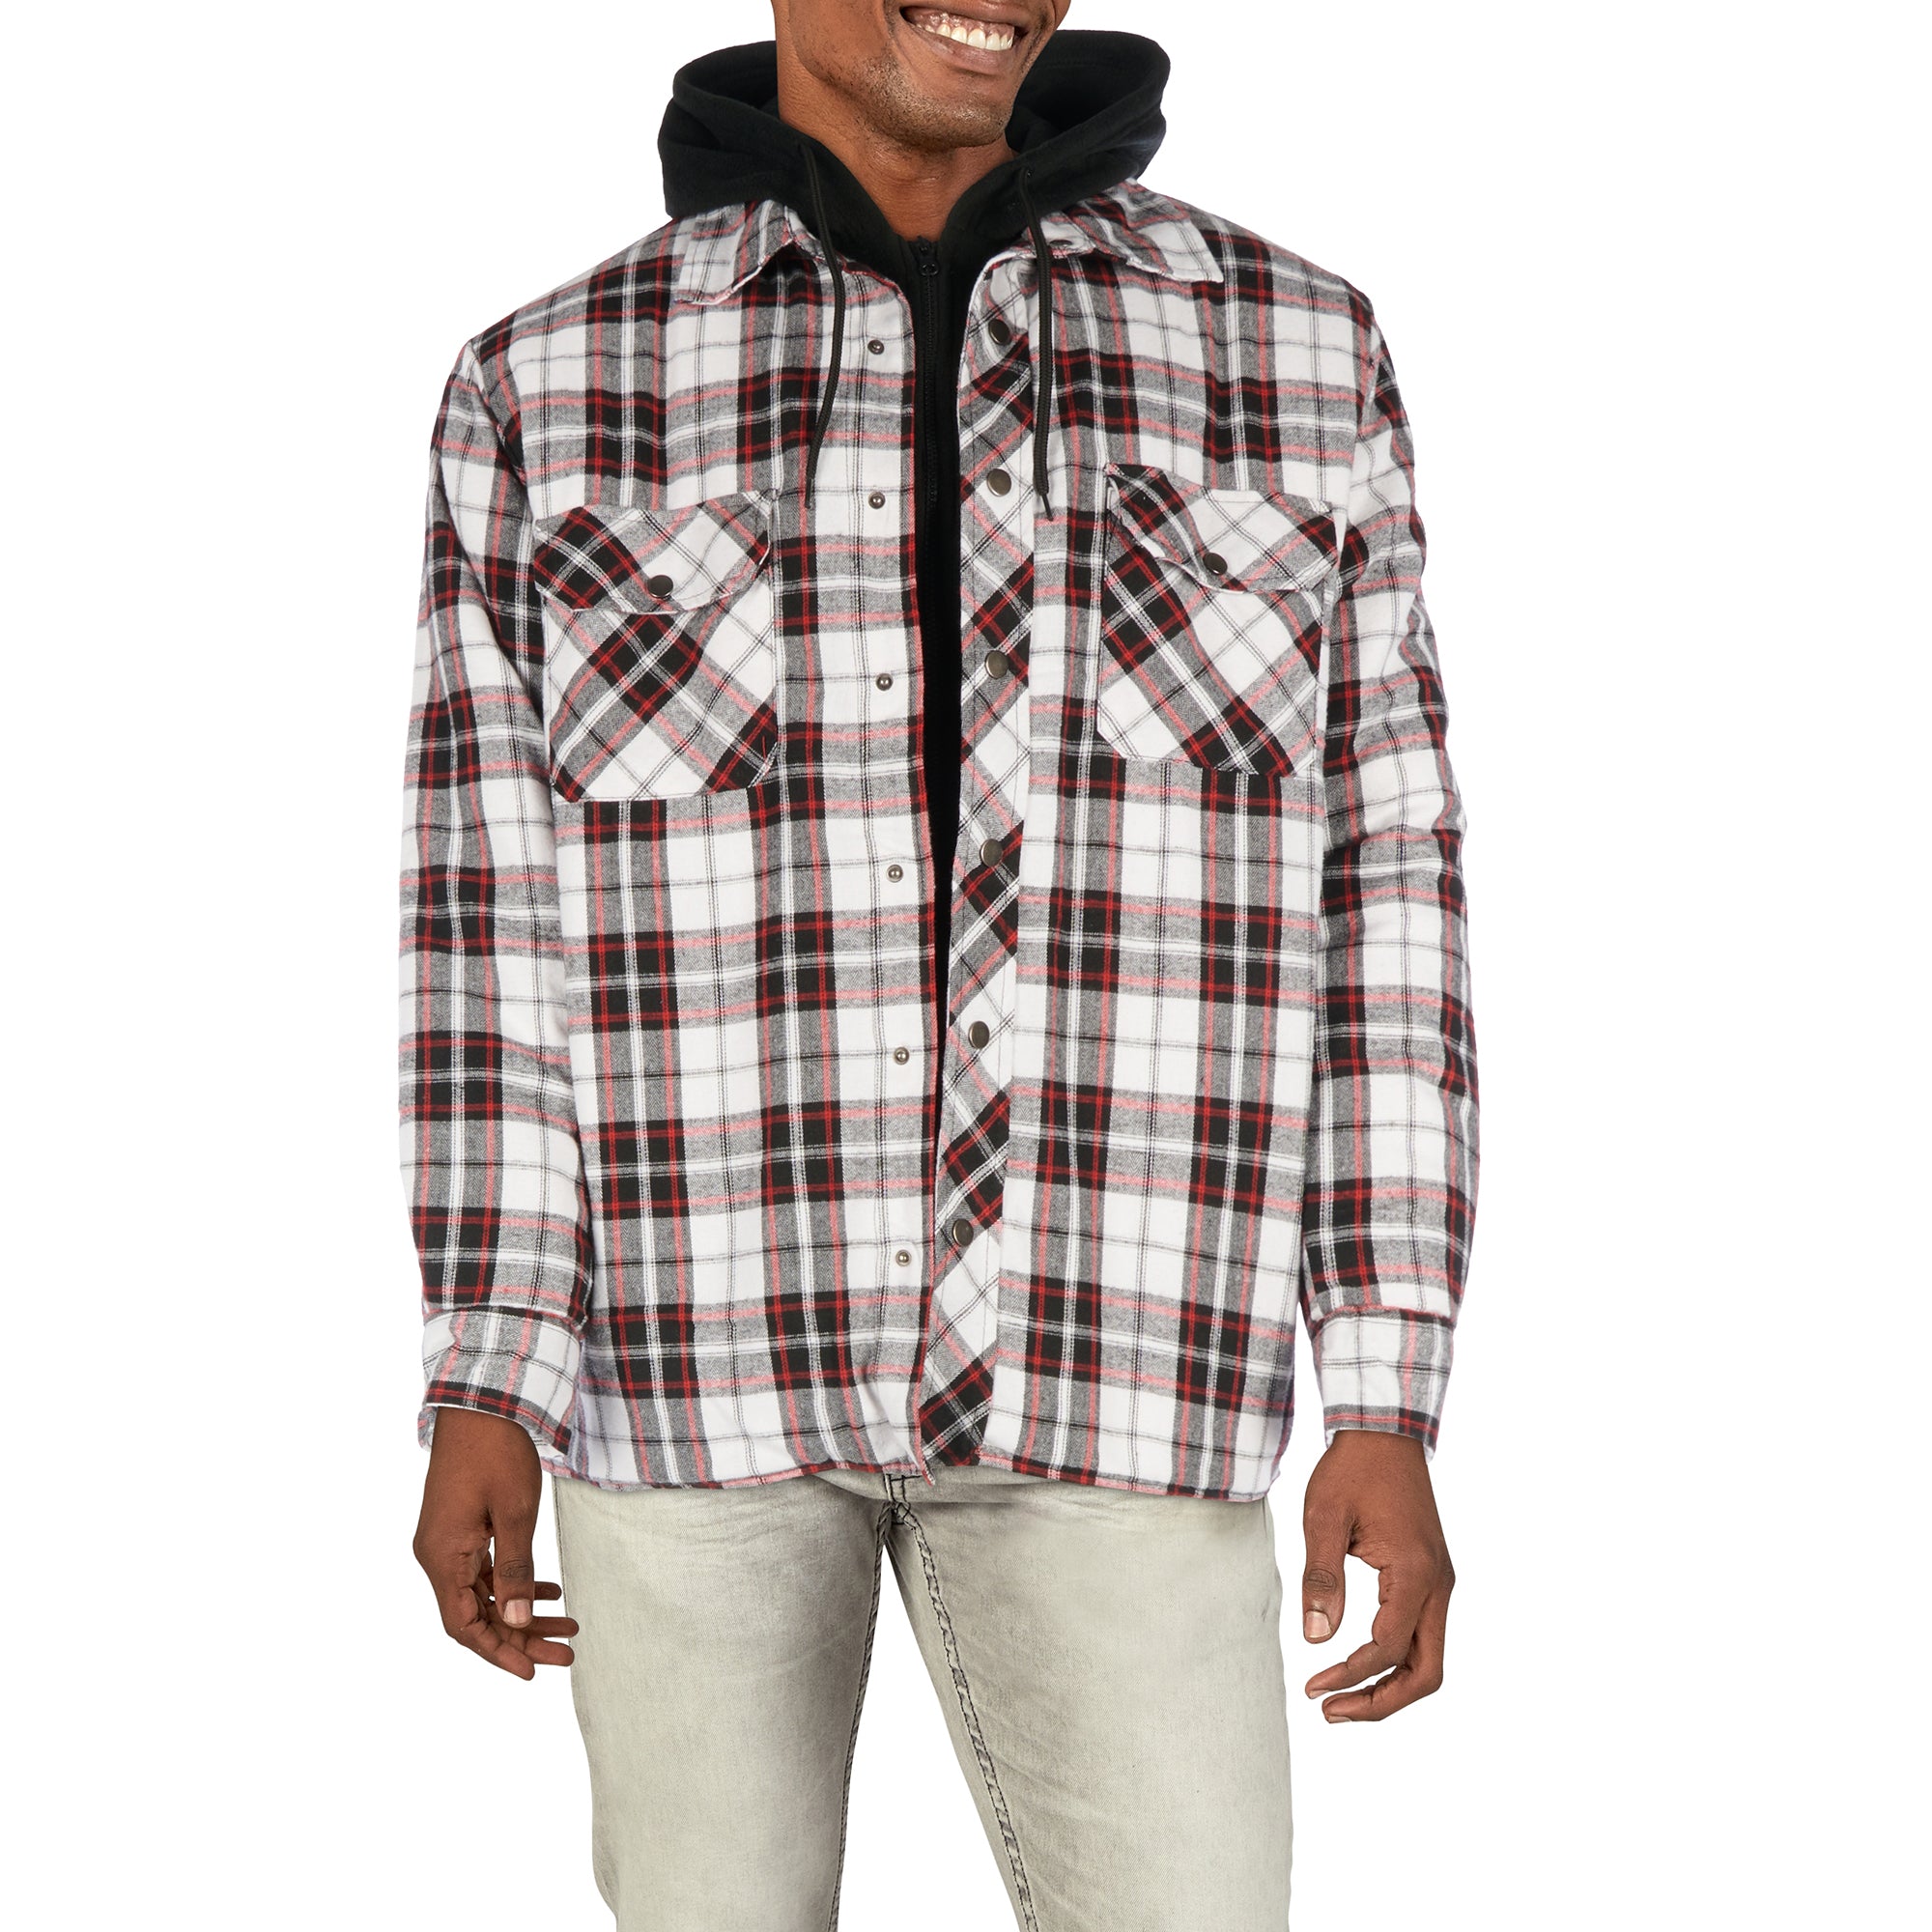 Quilted flannel shirt with hood and rustproof snaps.